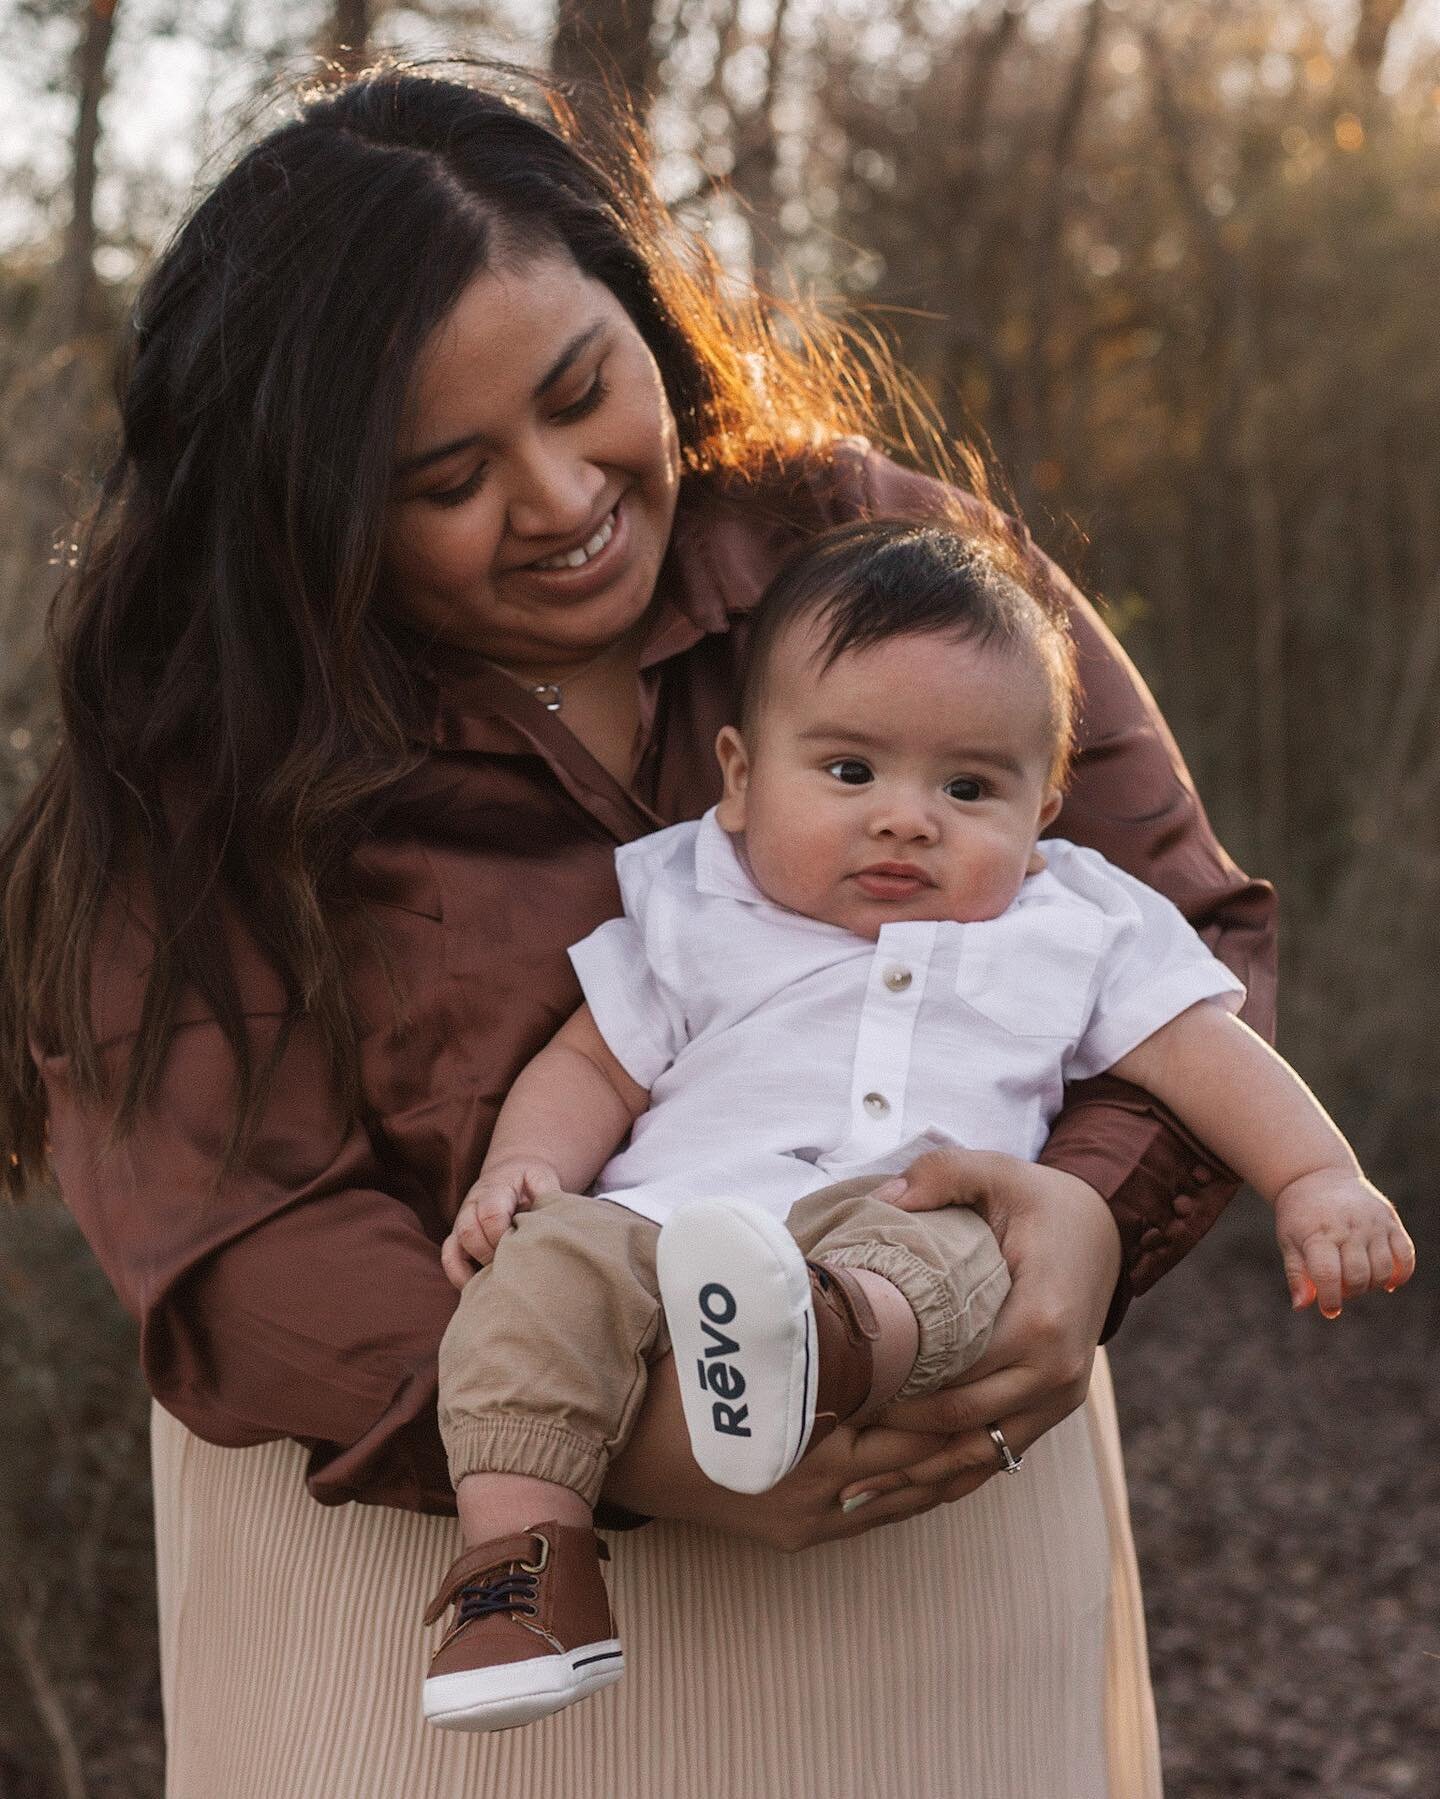 Mini sessions are perfect when you&rsquo;ve got littles like baby Phoenix + you&rsquo;re dealing with Texas weather that likes change from minute to minute.

Bring on the Spring 📷 🌸 sessions y&rsquo;all! Click the link in my bio to book! #mommyandm